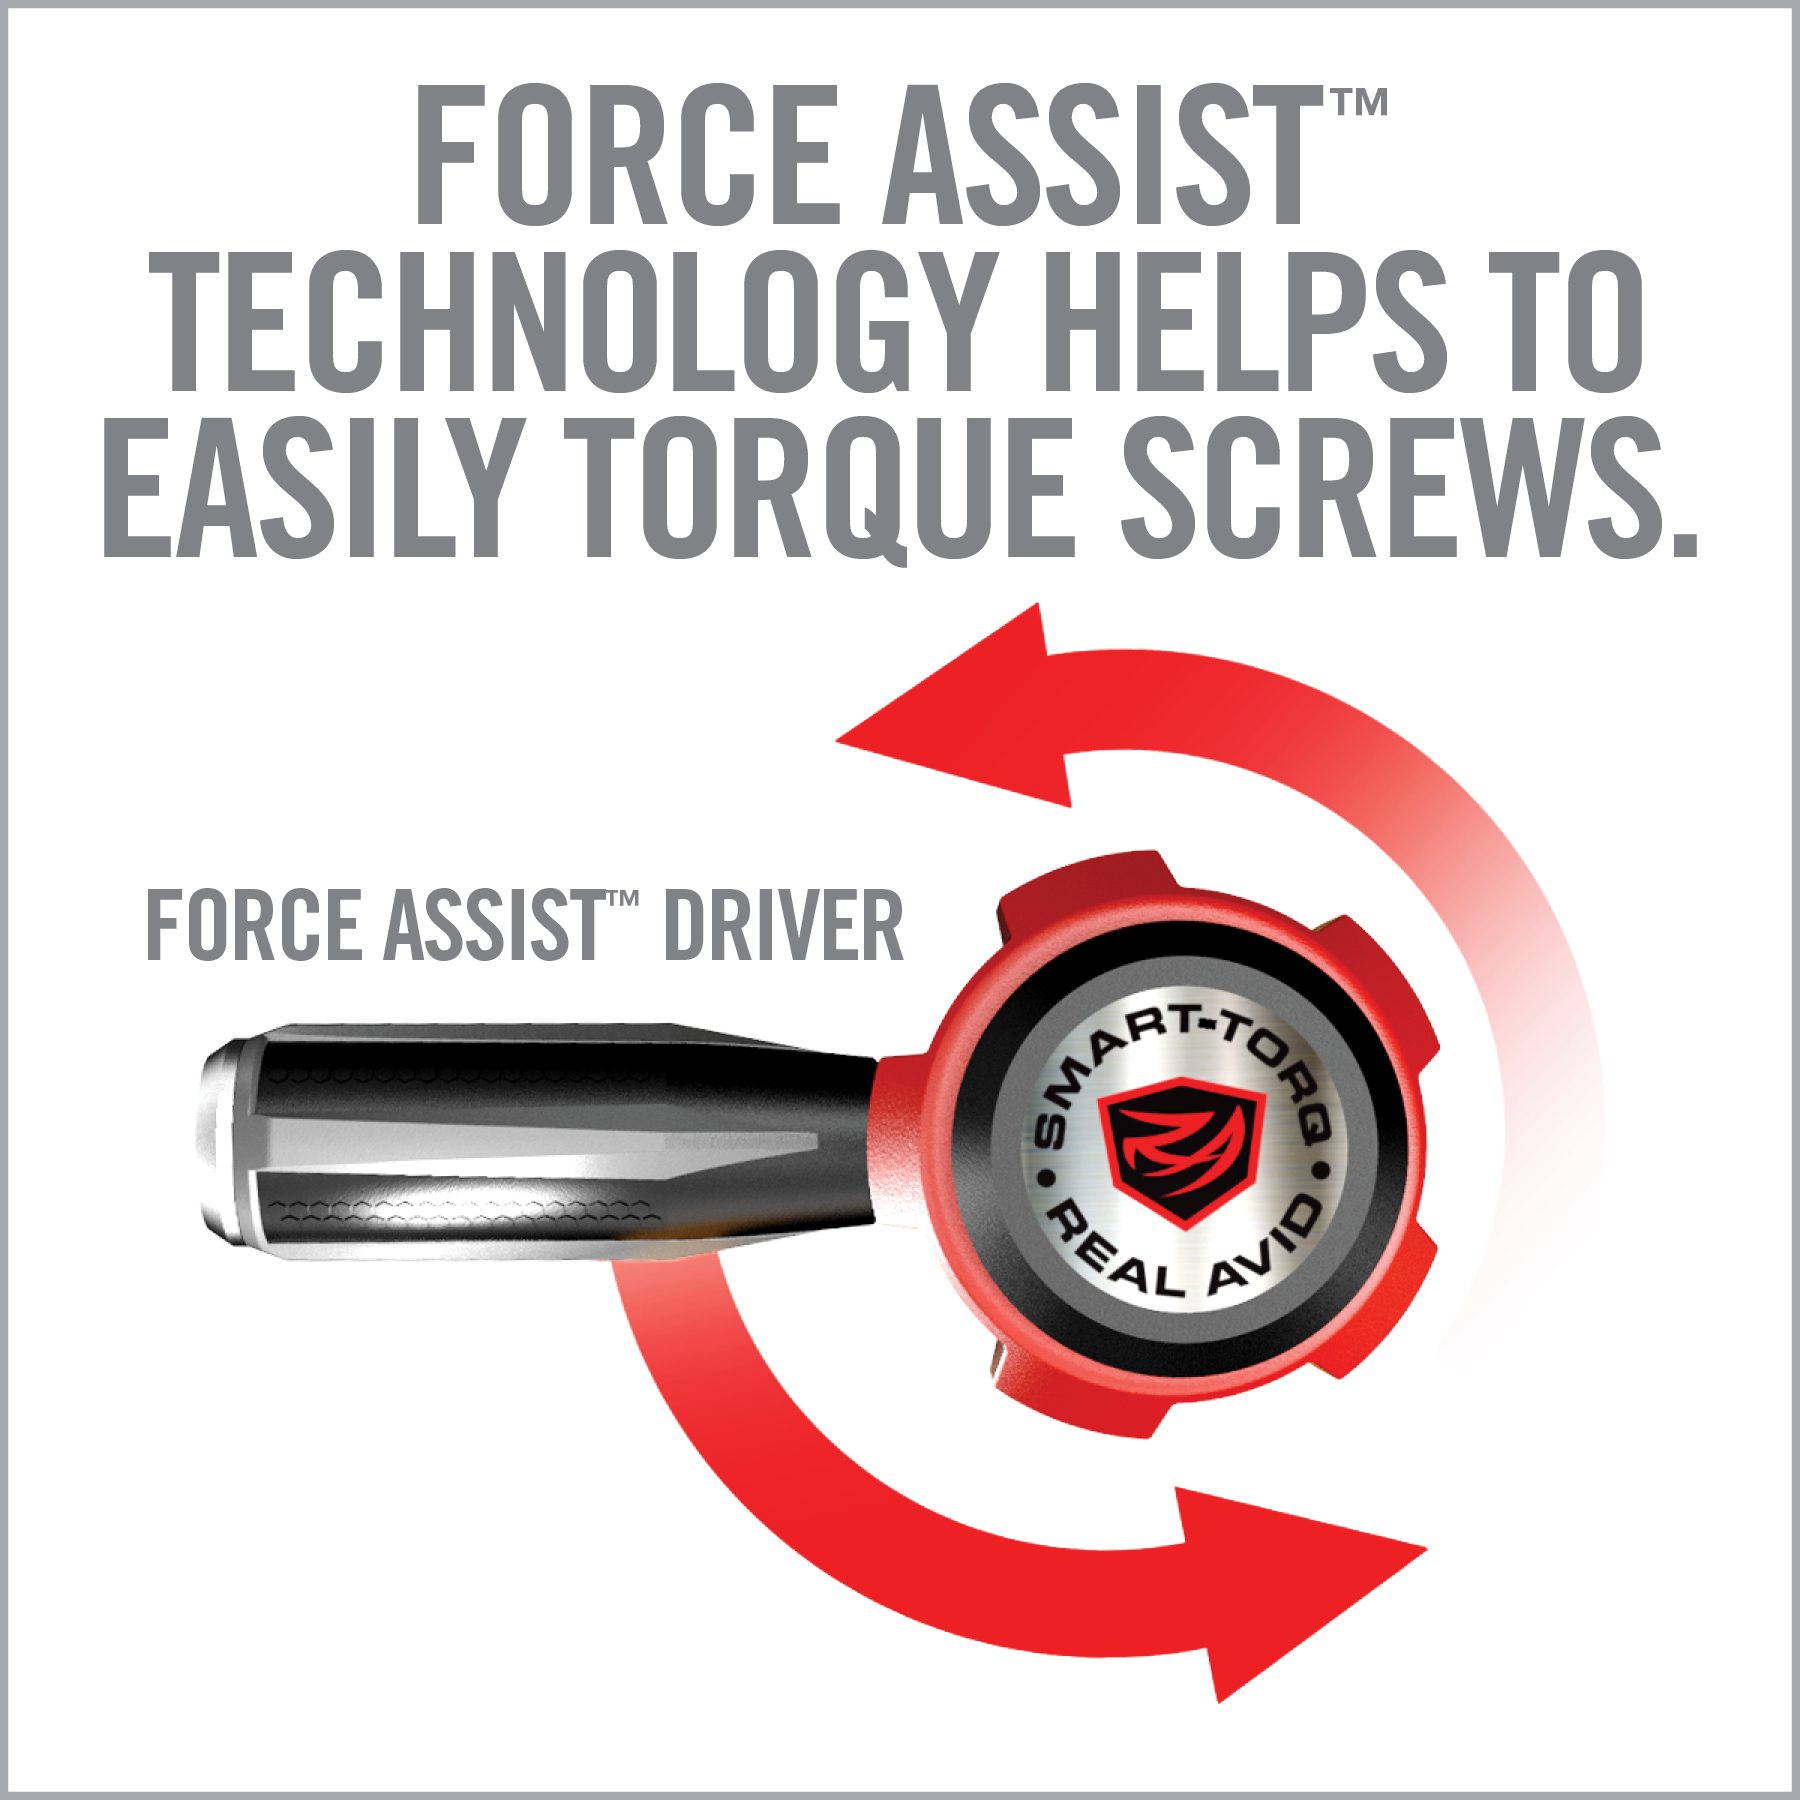 an advertisement for force assist technology helps to easily drive screws